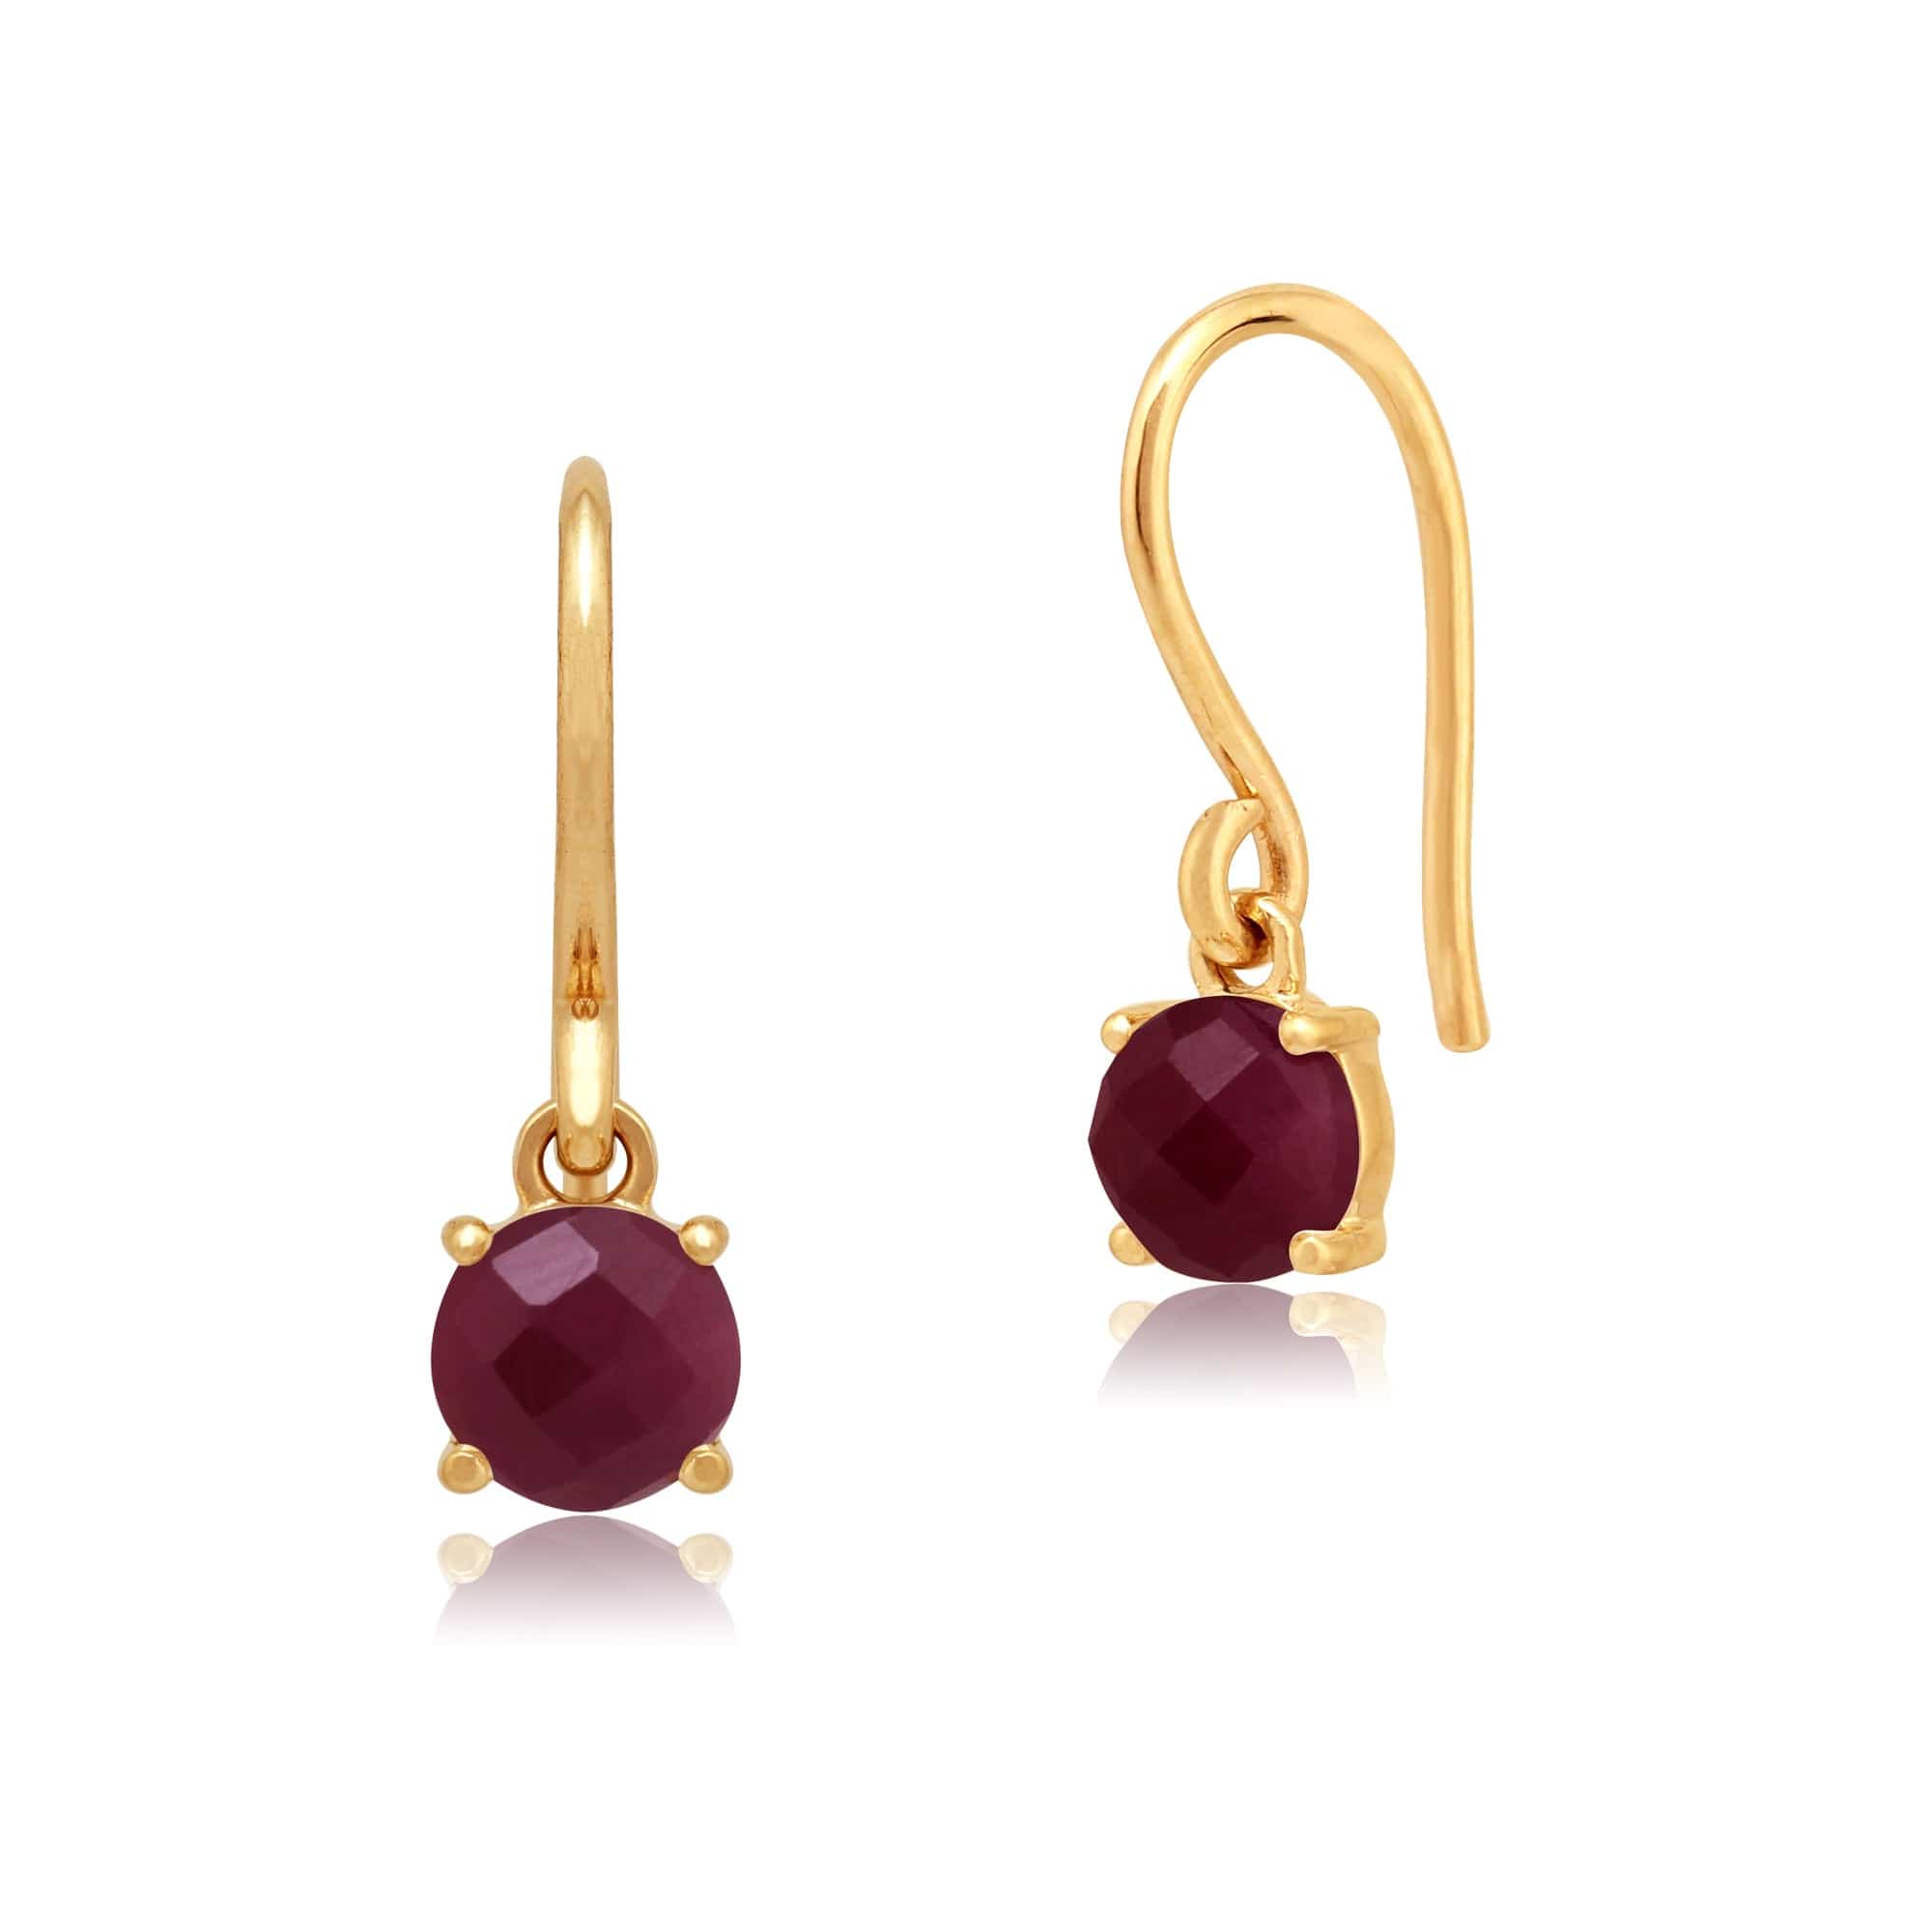 Classic Round Ruby Checkerboard Drop Earrings in 9ct Yellow Gold - Gemondo